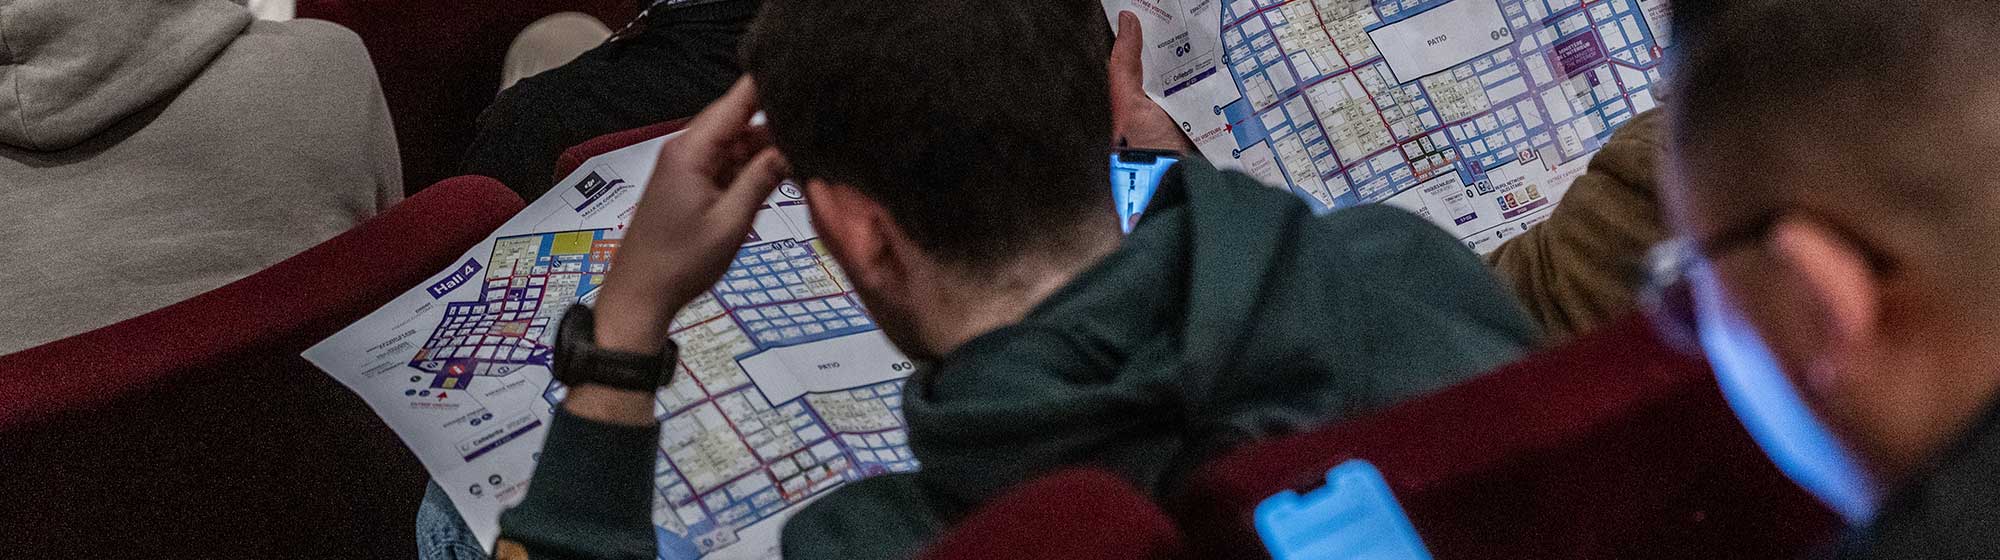 Two men consult a Milipol Paris map sitting in an auditorium full of people